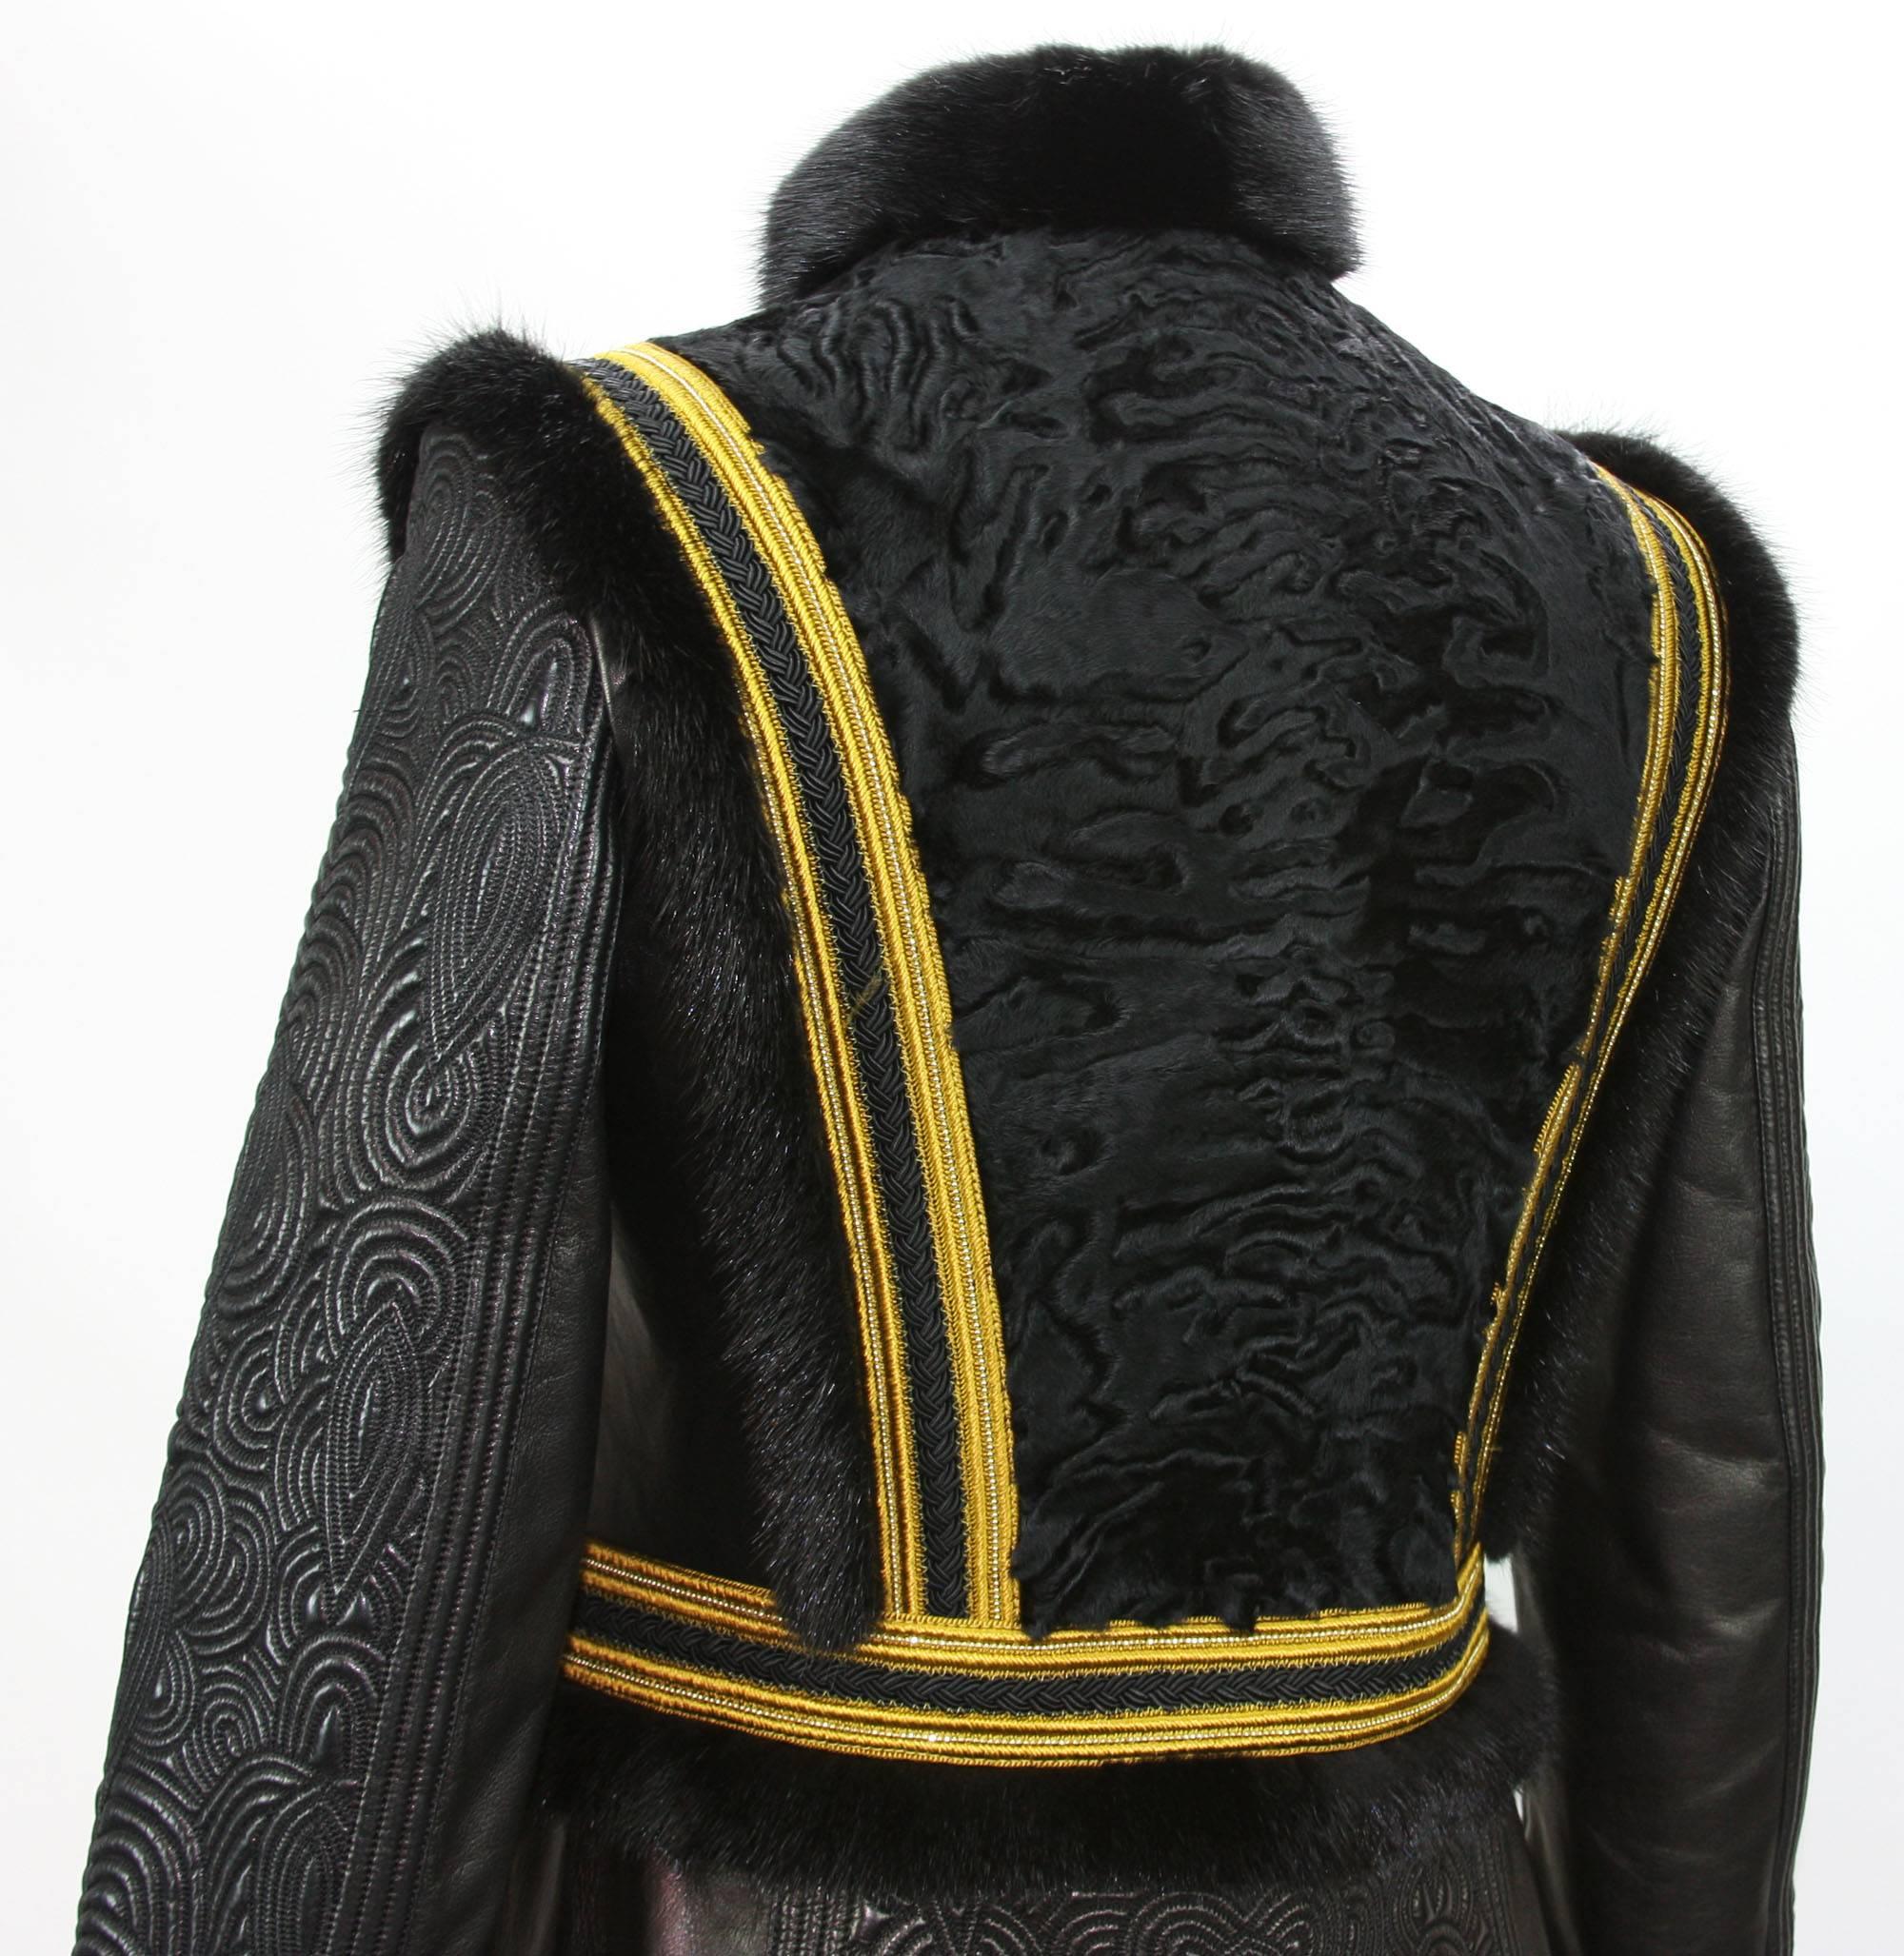 NEW Exquisite $7650 ETRO Embossed Leather Mink Fur Lamb Jacket It.42 - US 6 For Sale 3